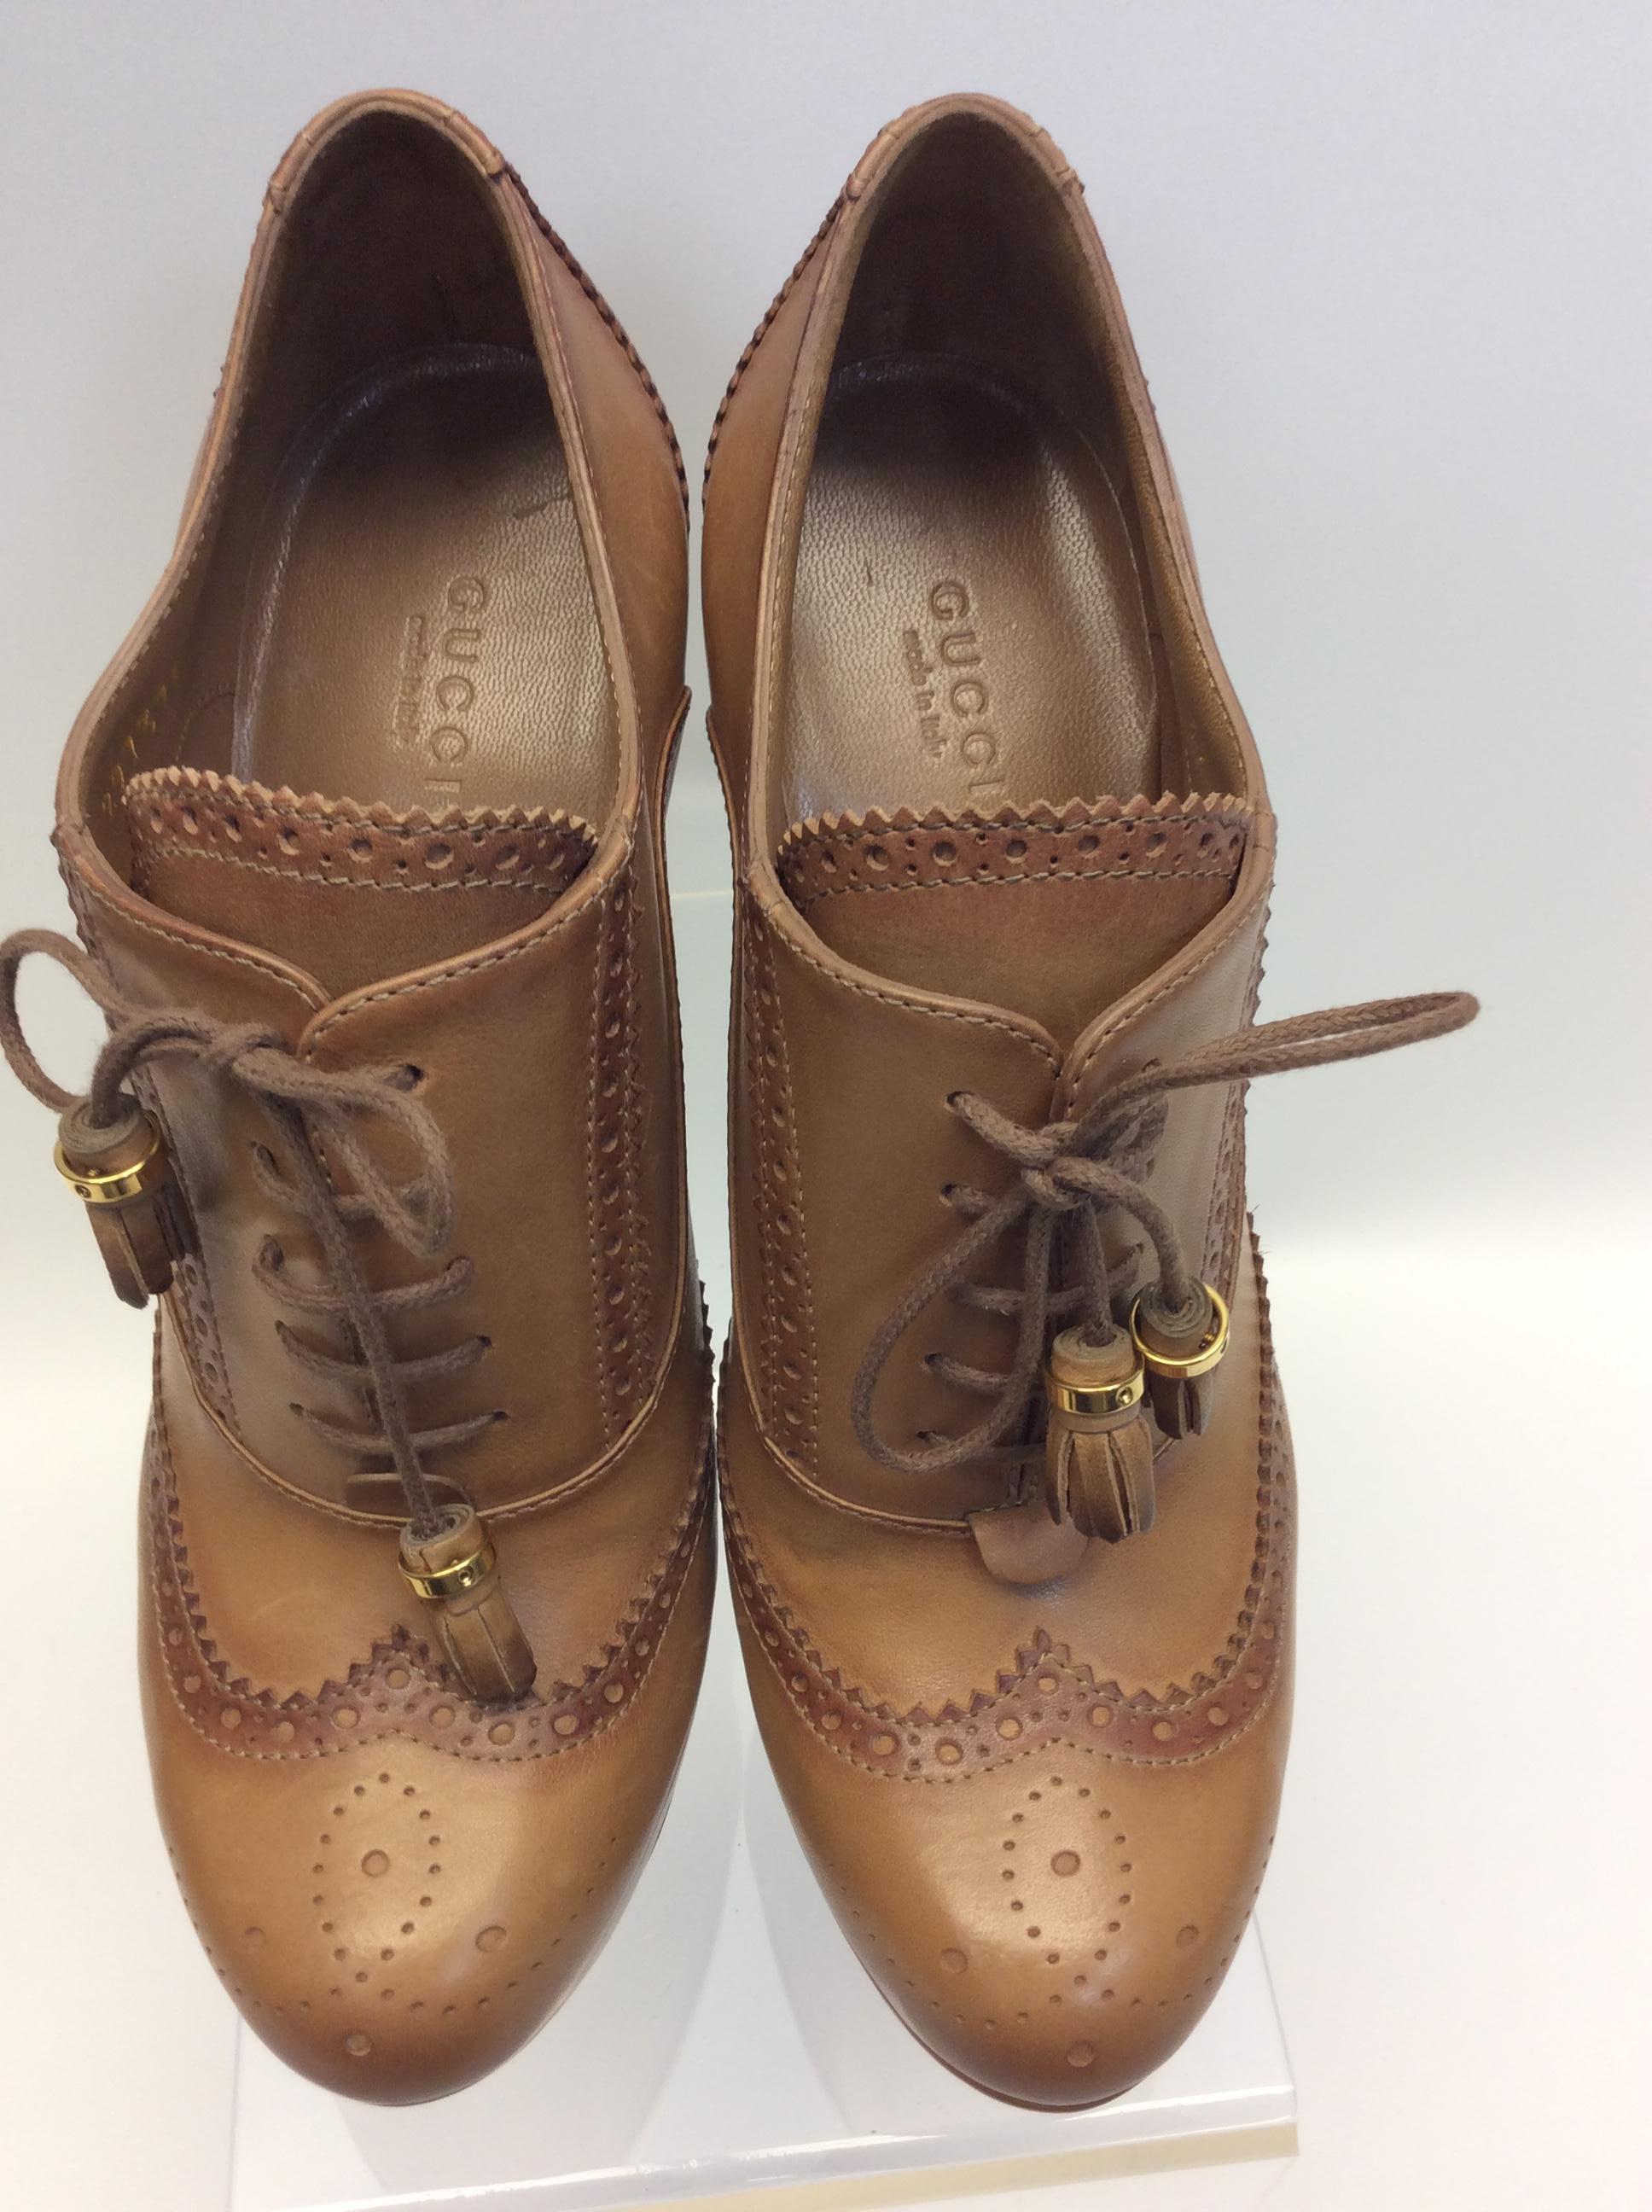 Women's Gucci Tan Leather Lace Up Wedge For Sale